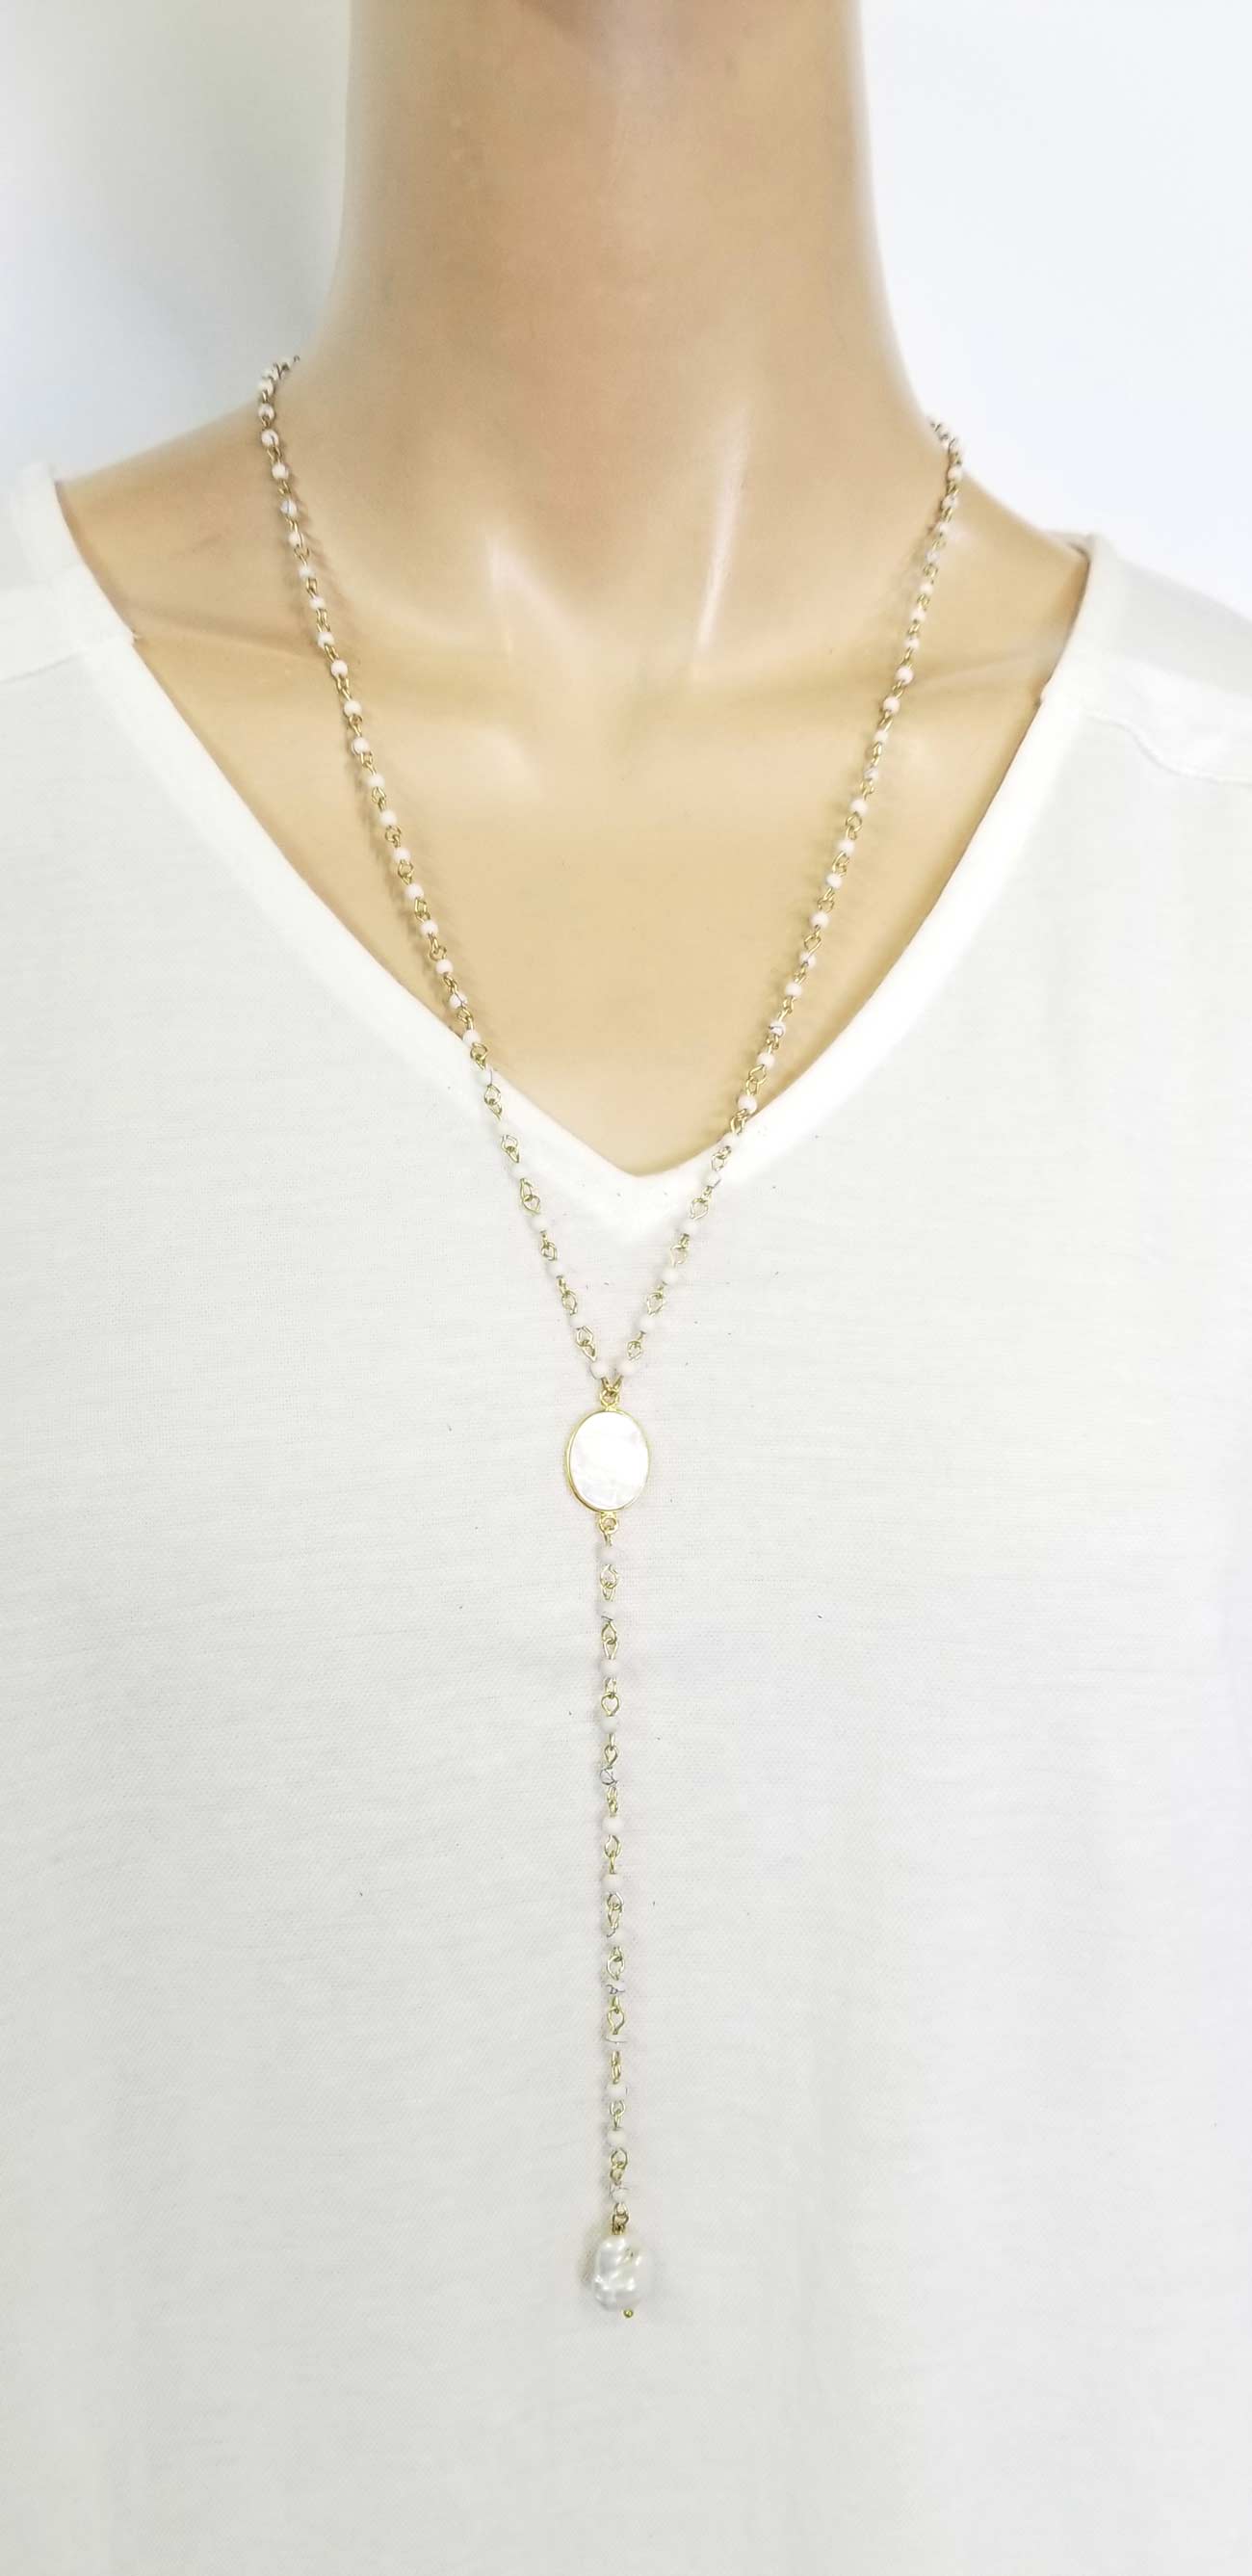 Accessories | Mala | Necklace Mother Pearl & Beads